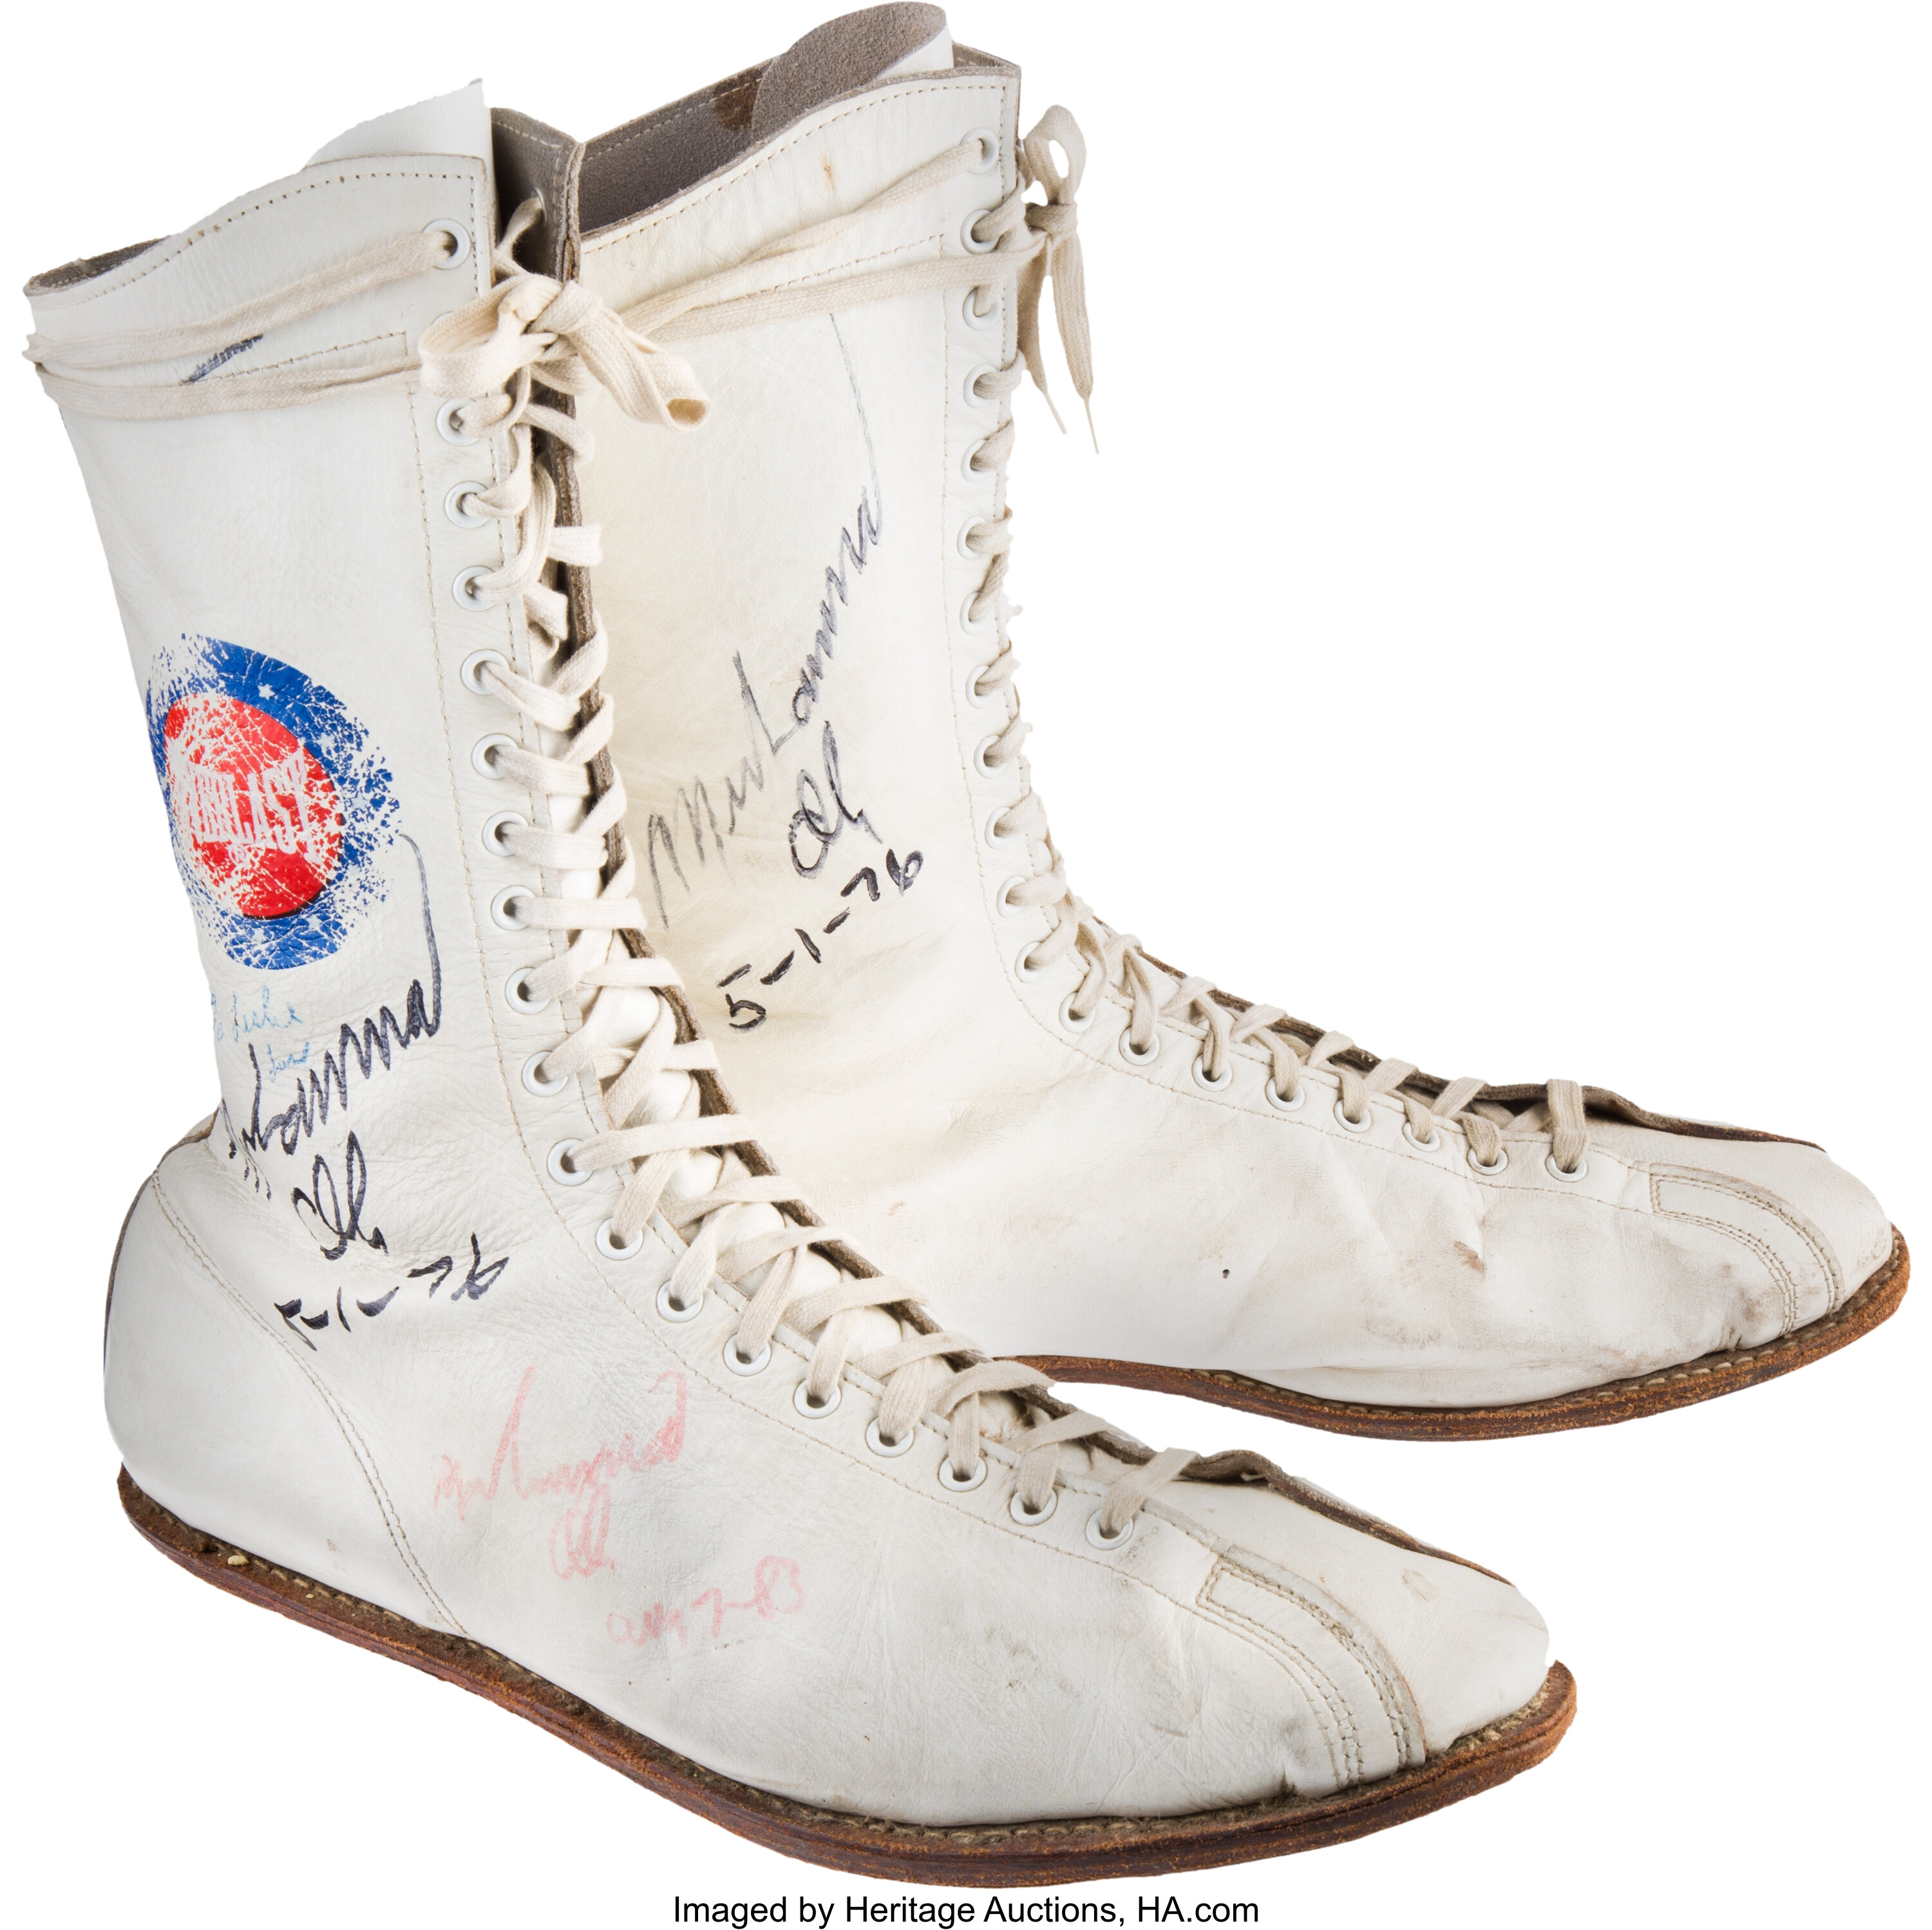 1976 Muhammad Ali Training Worn & Signed Shoes for Jimmy Young | Lot #50051  | Heritage Auctions